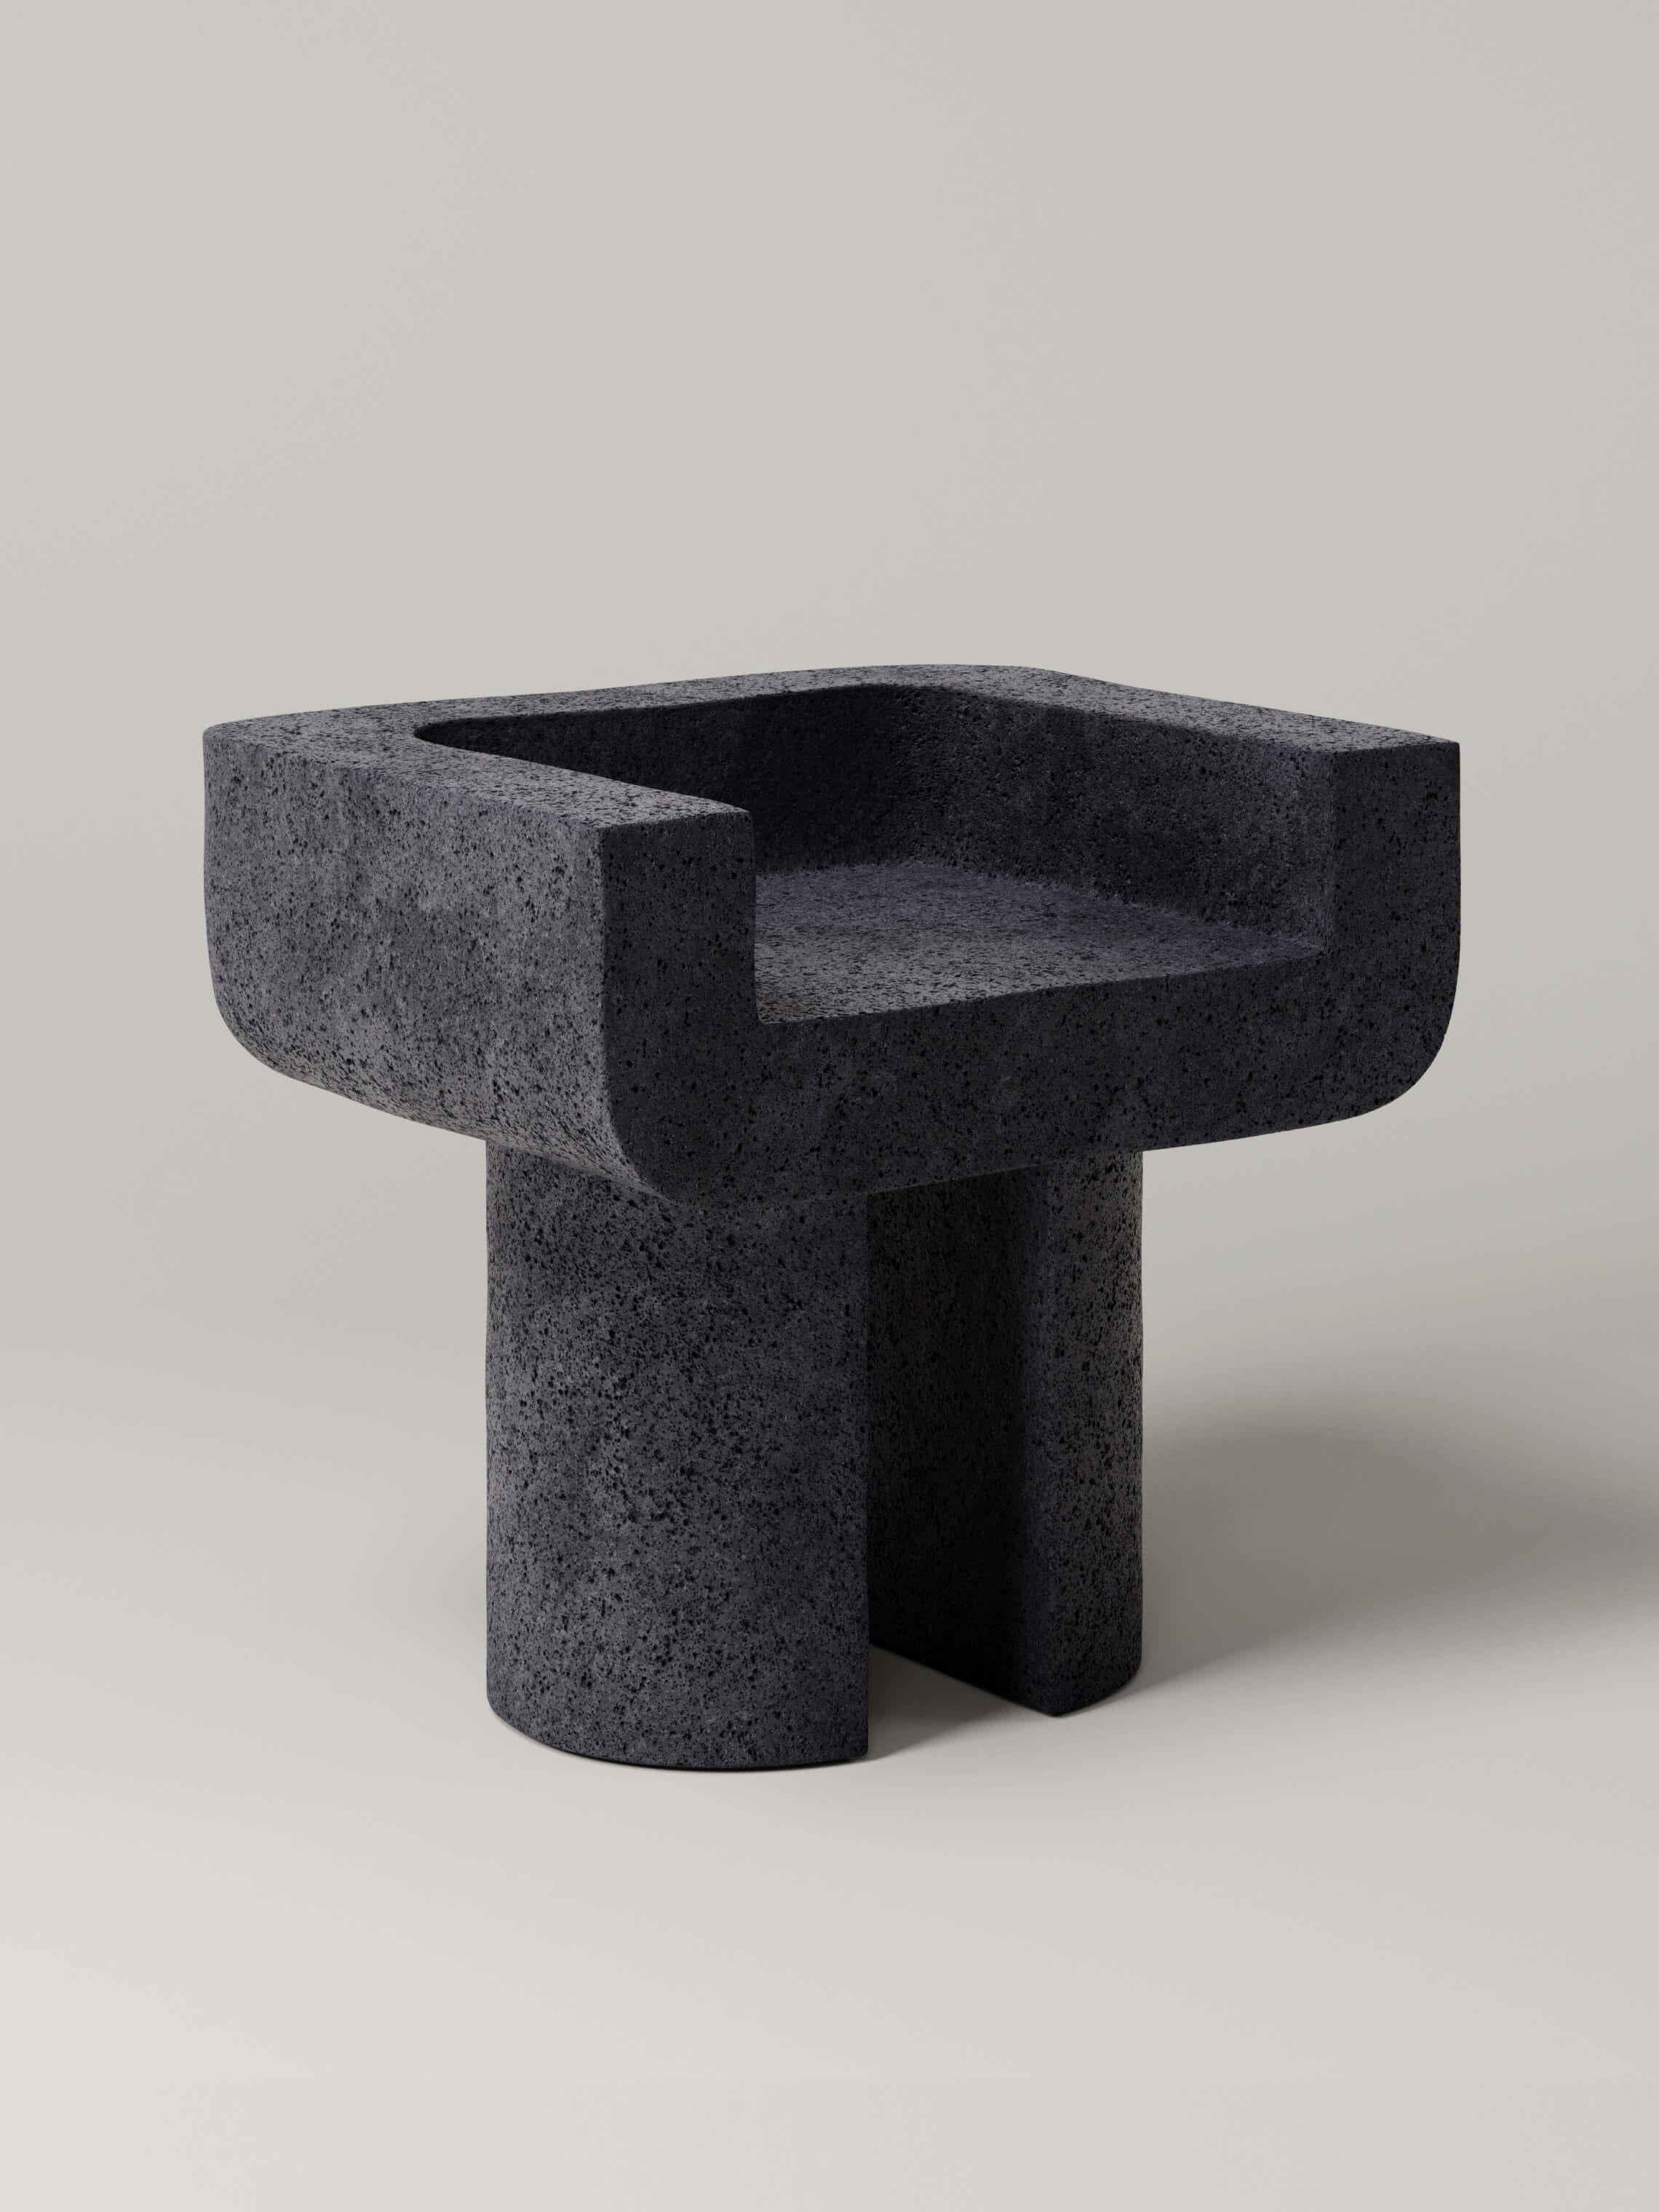 M_001 Lava Rock Chair by Monolith Studio
Signed and Numbered.
Dimensions: D 53,5 x W 65 x H 58,5 cm.
Materials: Lava rock.

Available in travertine, white onyx, lava rock and white oak. Please contact us. 

Monolith, founded in 2022 by Marc